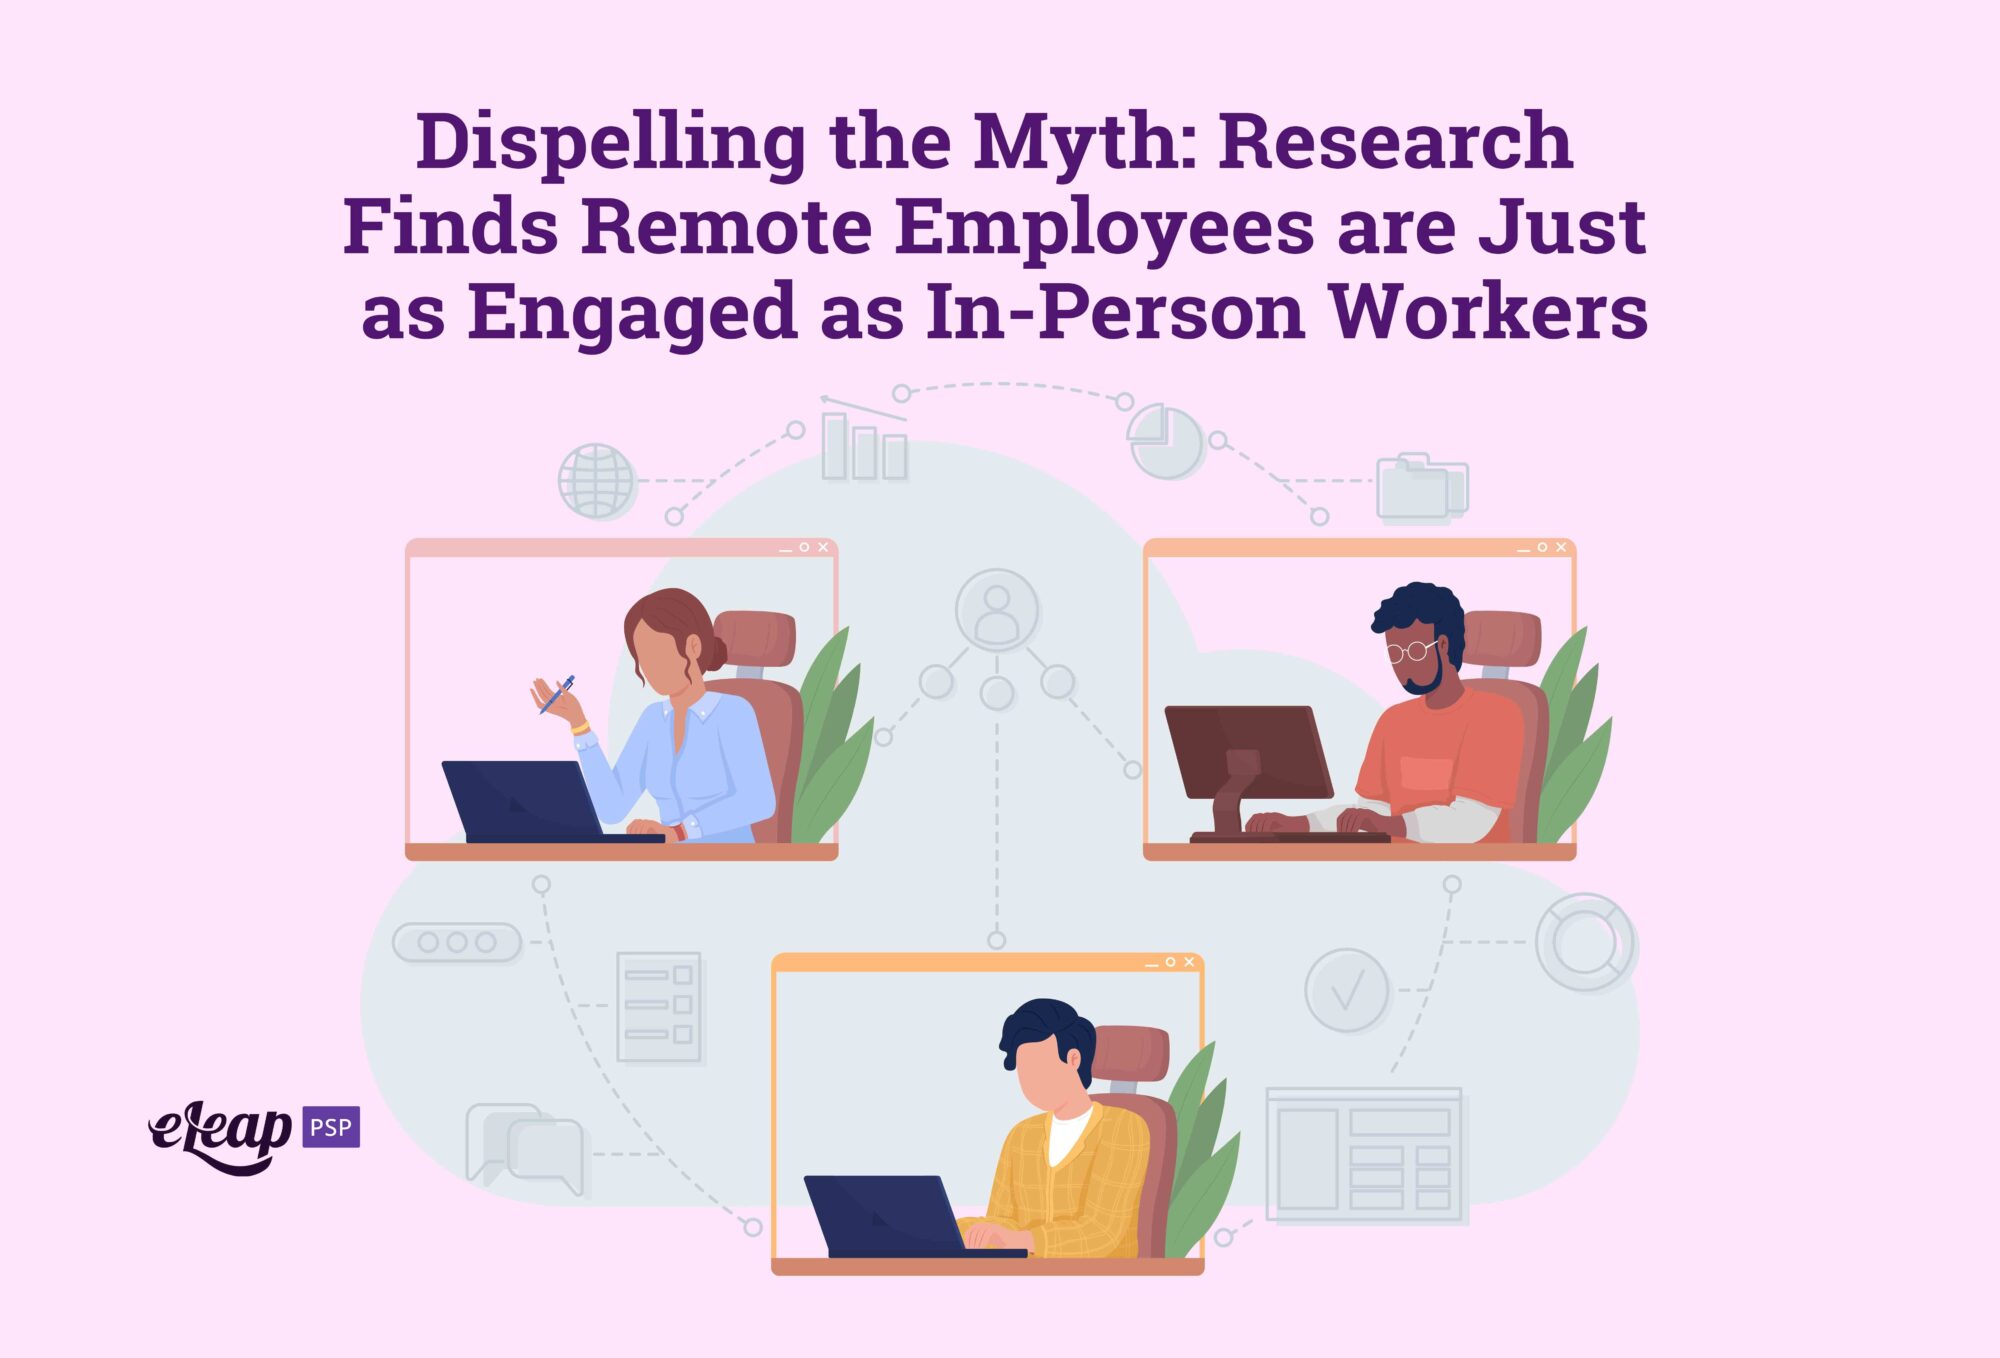 Dispelling the Myth: Research Finds Remote Employees are Just as Engaged as In-Person Workers, Despite Management Skepticism